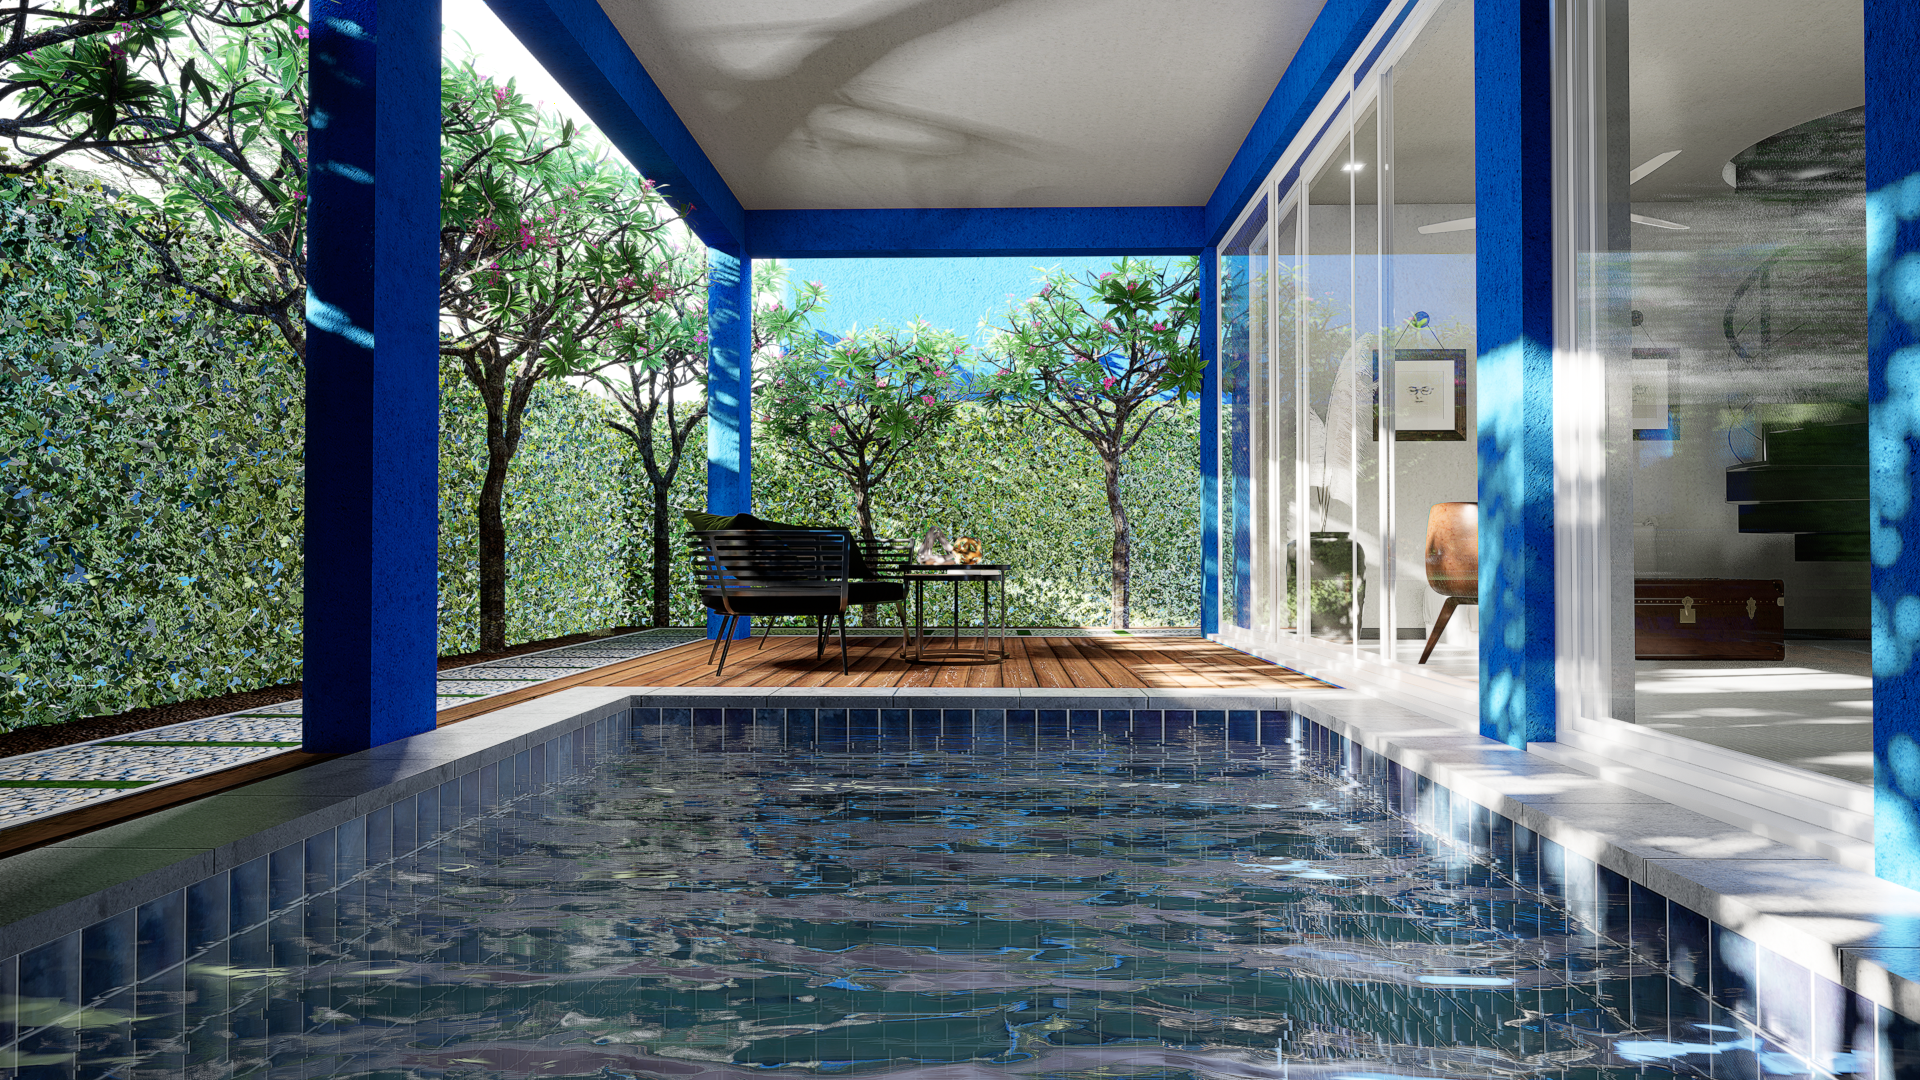 Visualizing Your Dream Home: How an Architectural Rendering Company Can Bring Your Residential Area, Swimming Pool, and Terrace Garden to Life